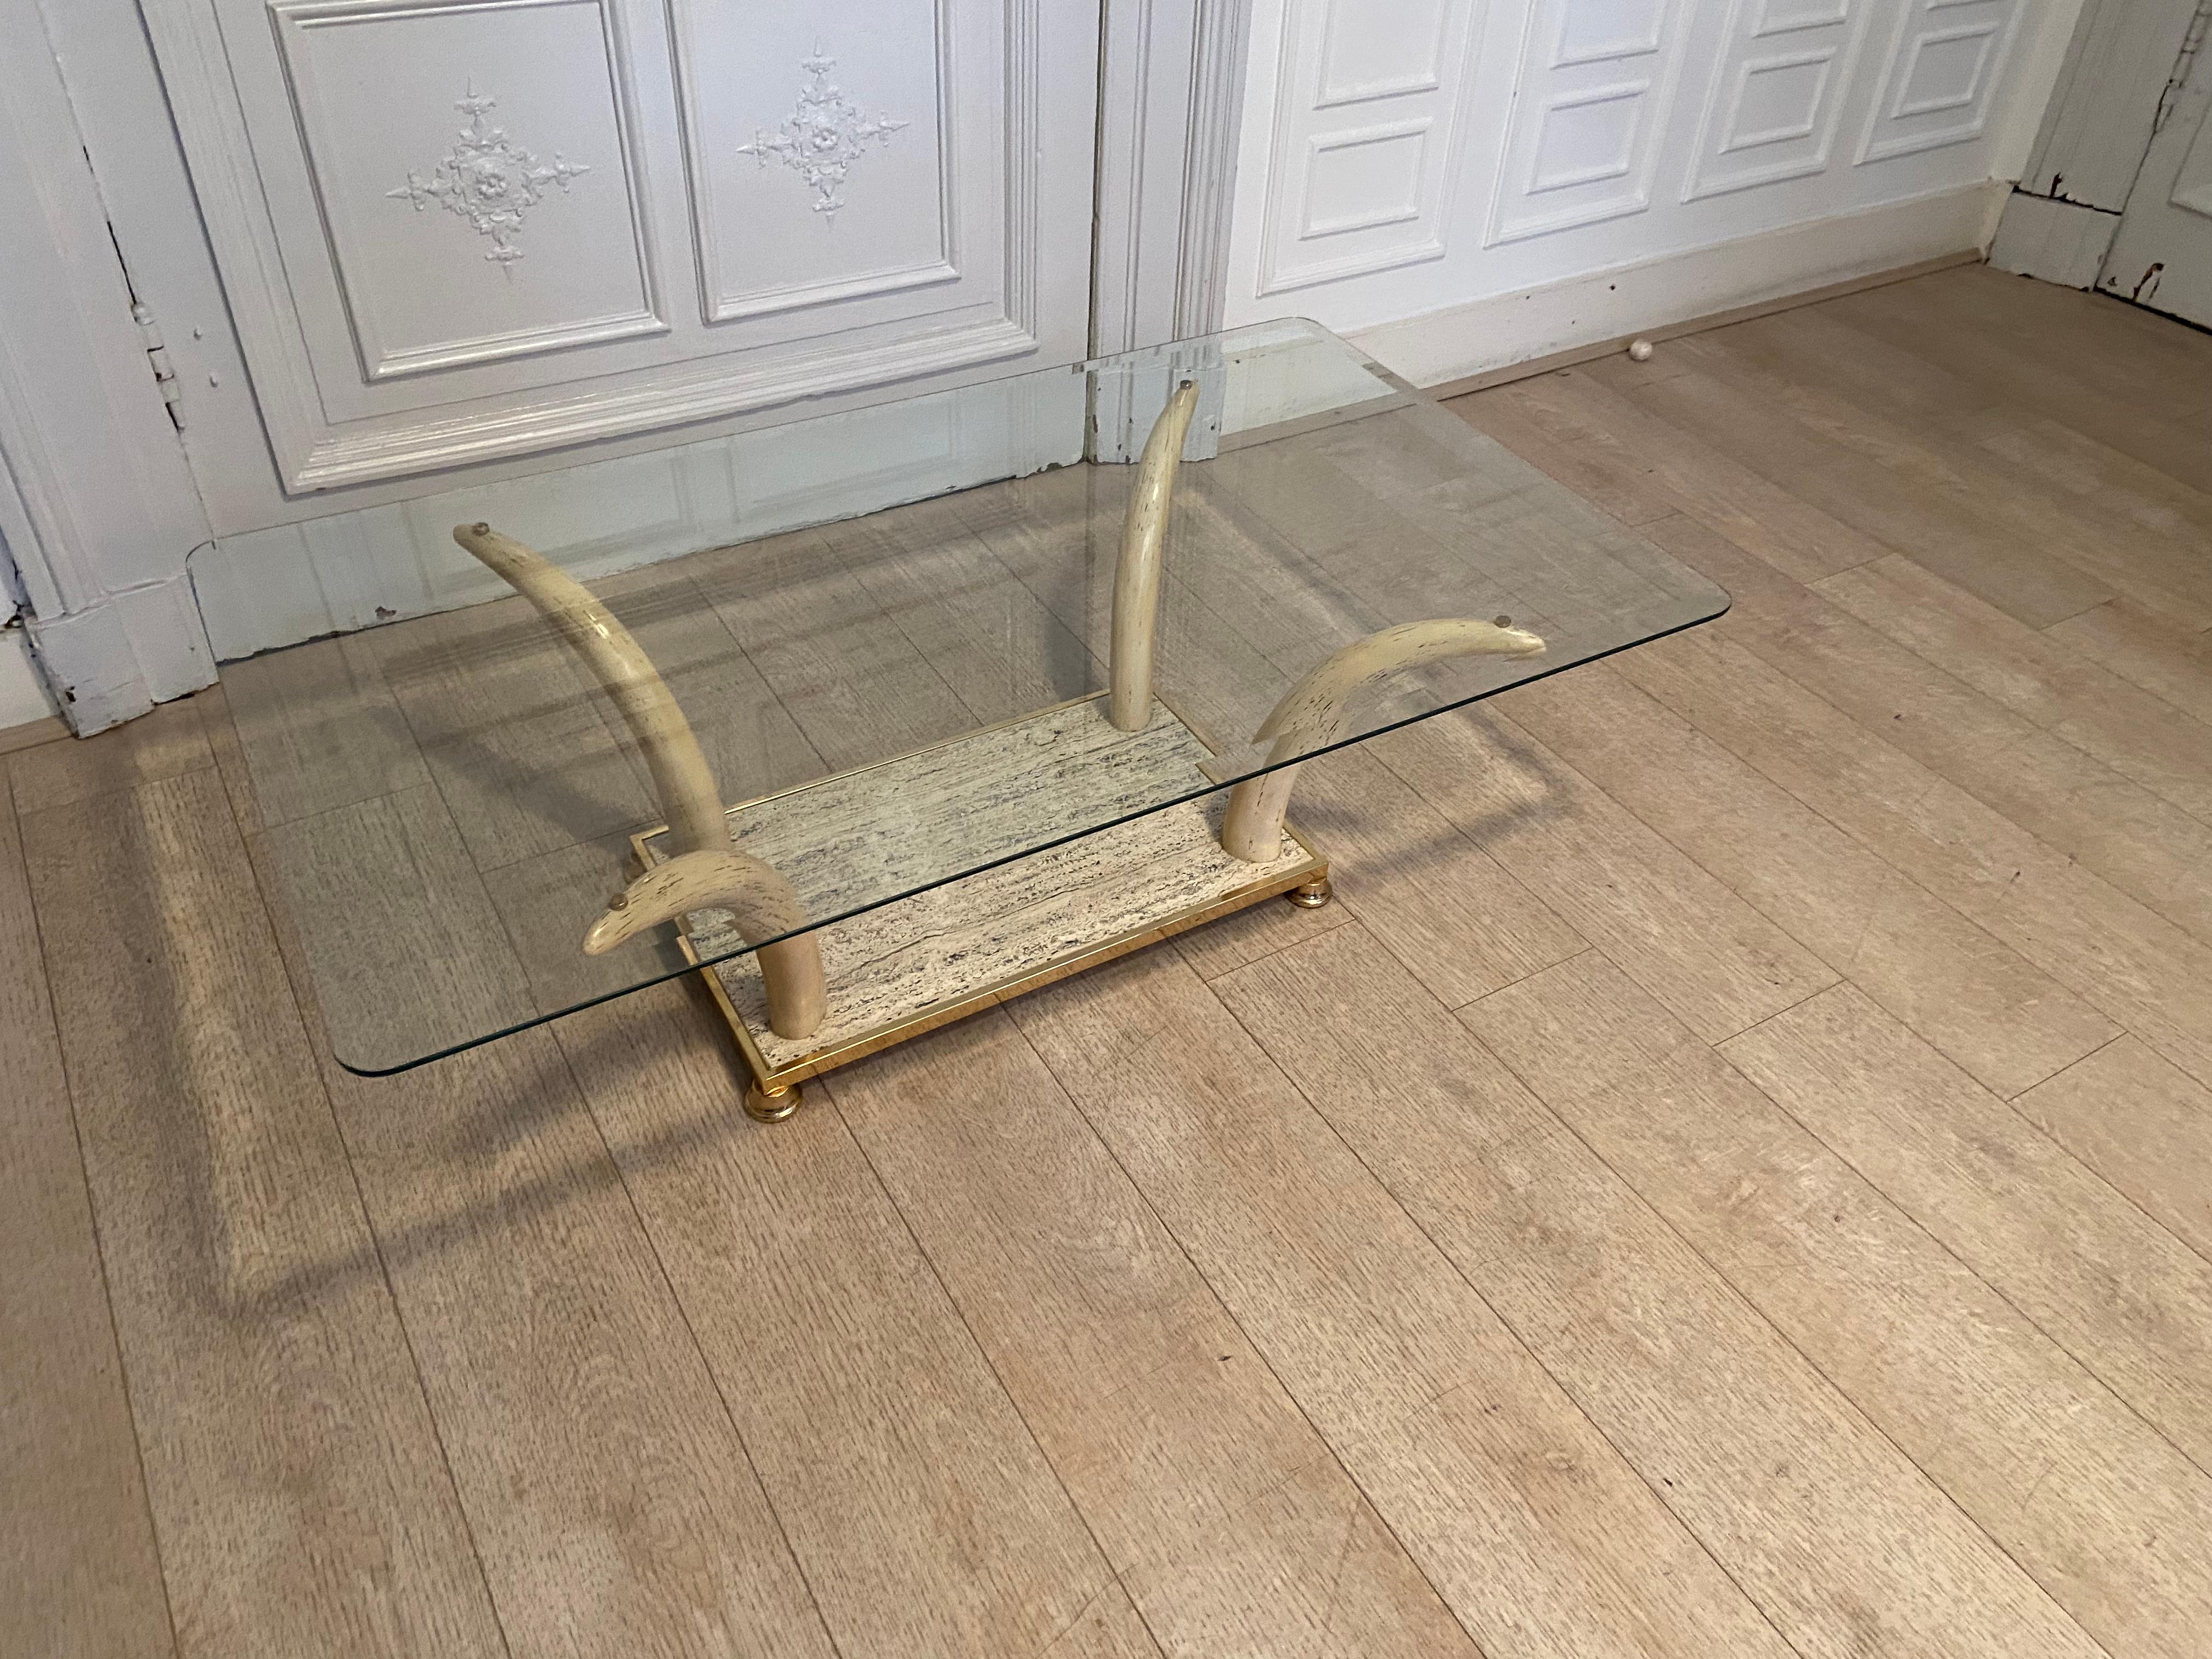 20th Century Mid-Century Modern Faux Elephant Tusk Coffee Table, 1970-1980s For Sale